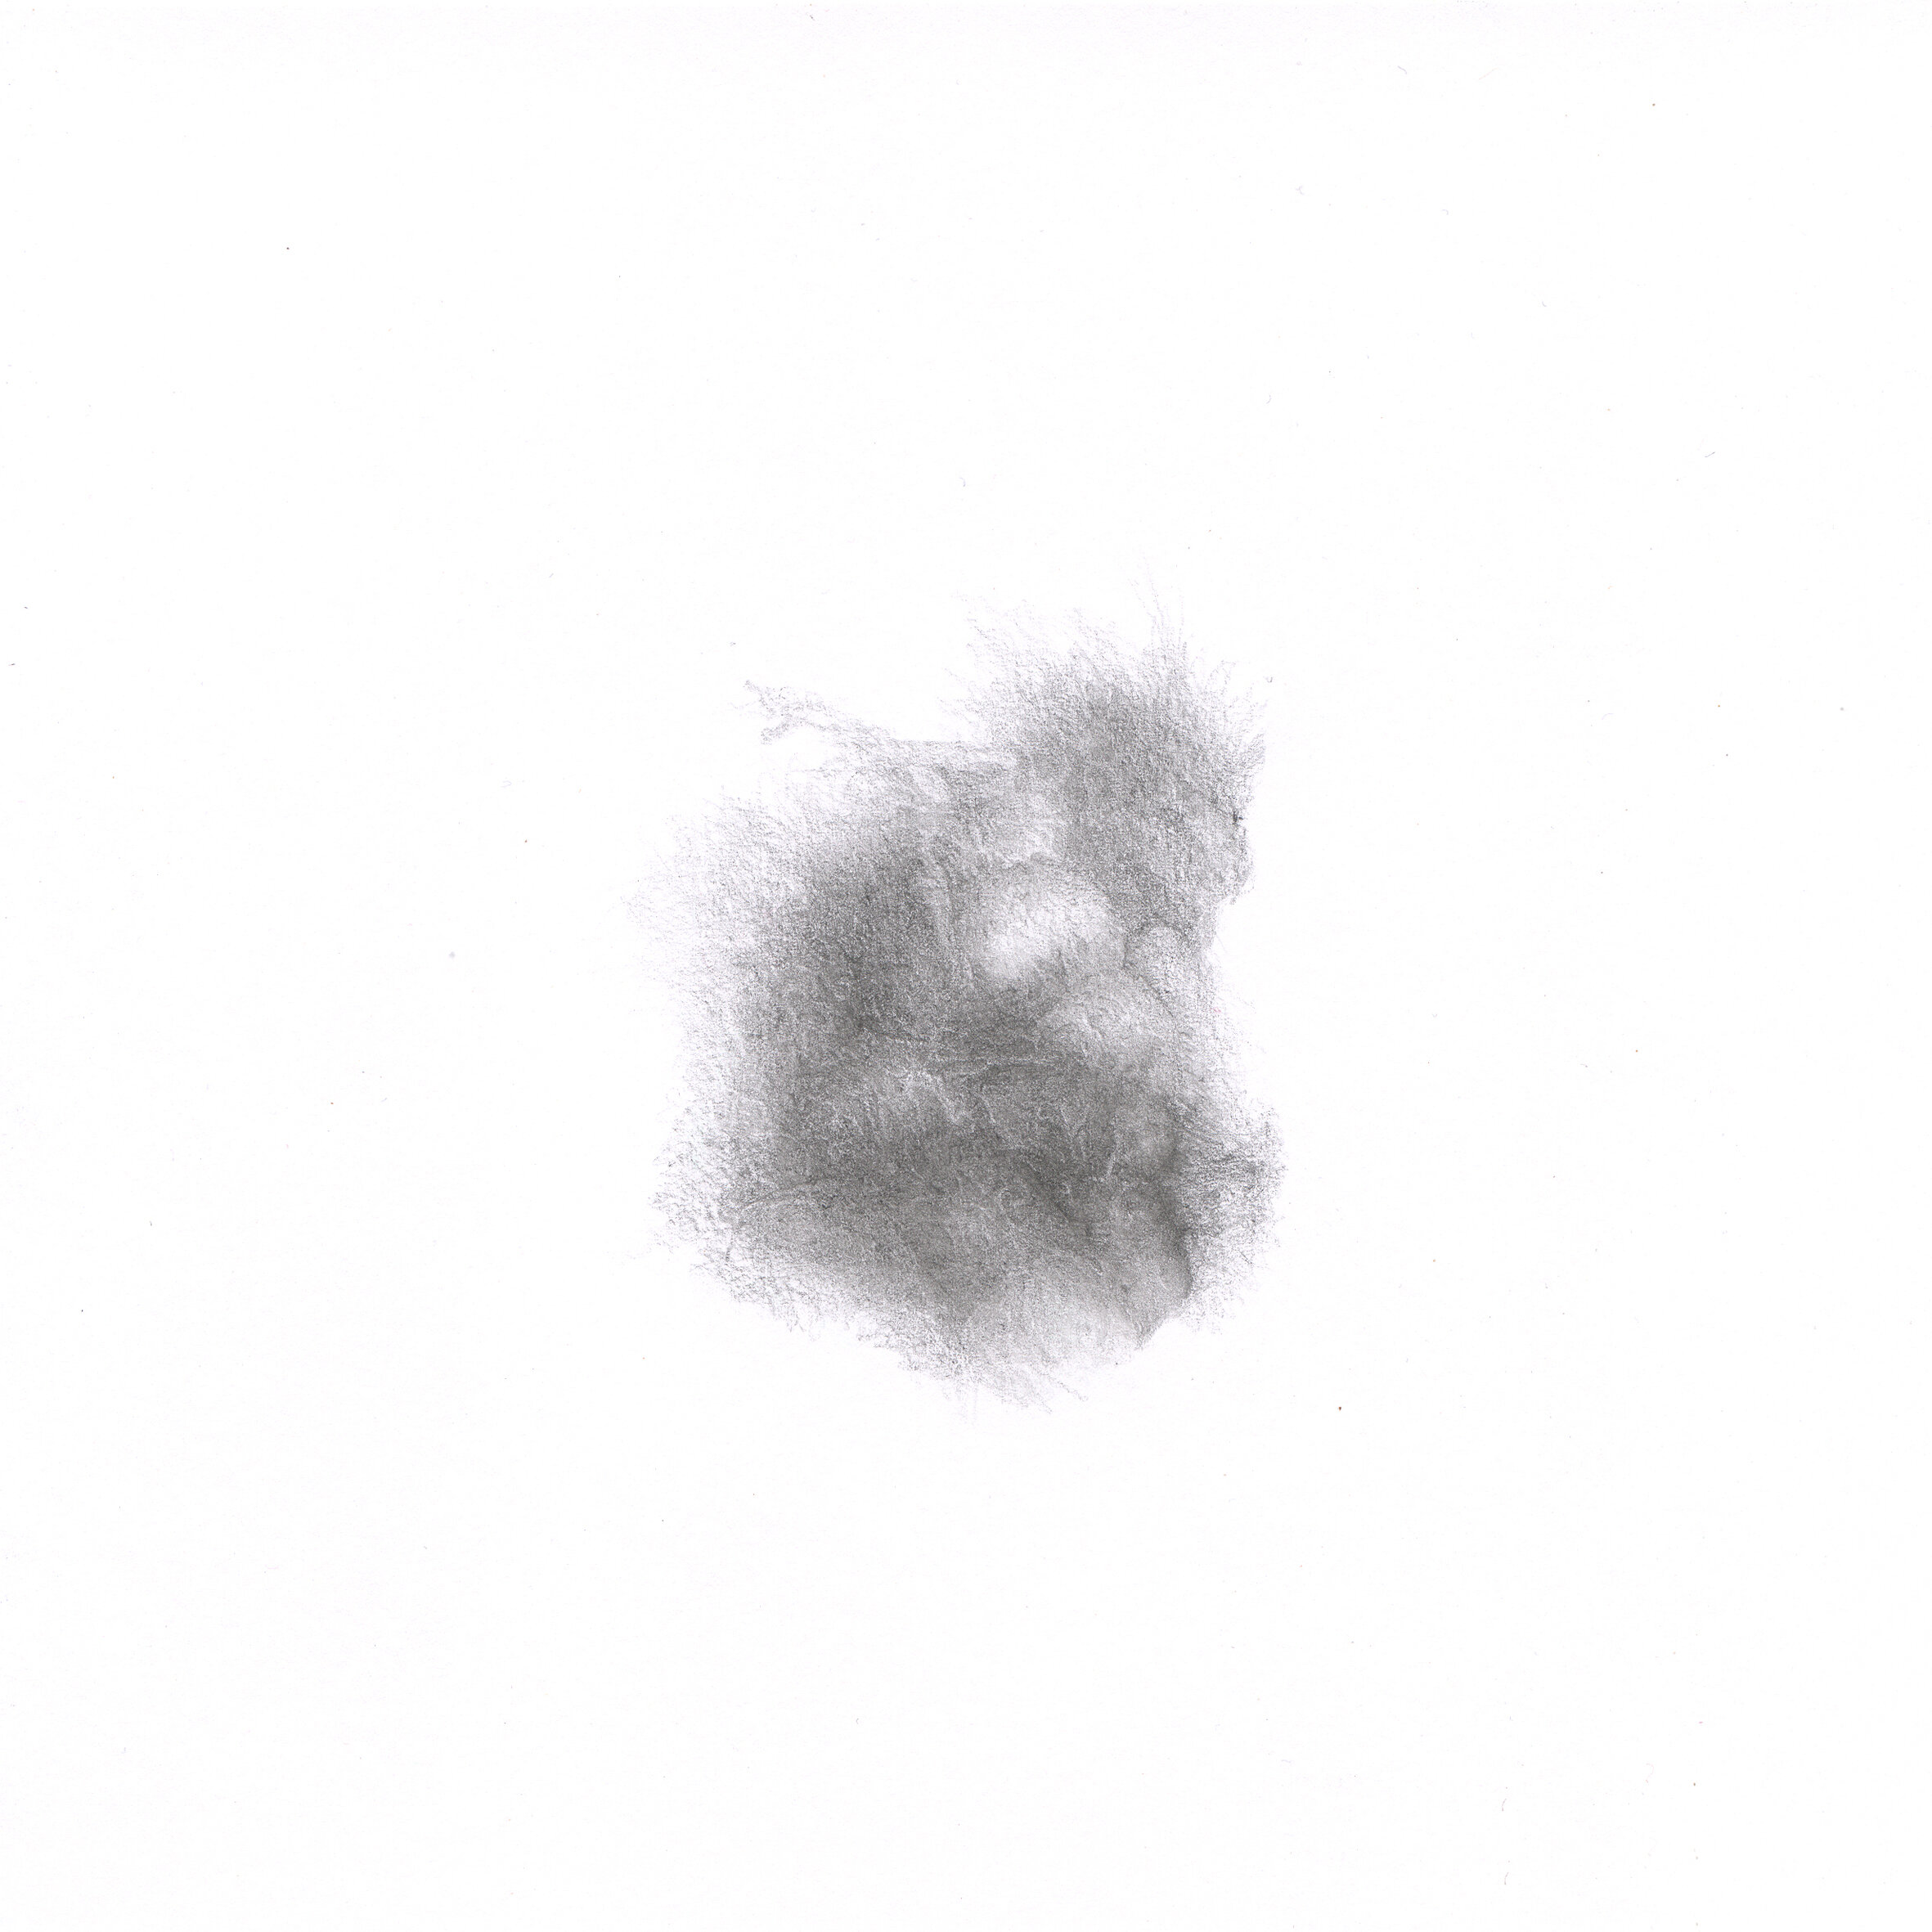  Drawing 04, 2013  Graphite on paper, 21.5 x 21.5 cm 